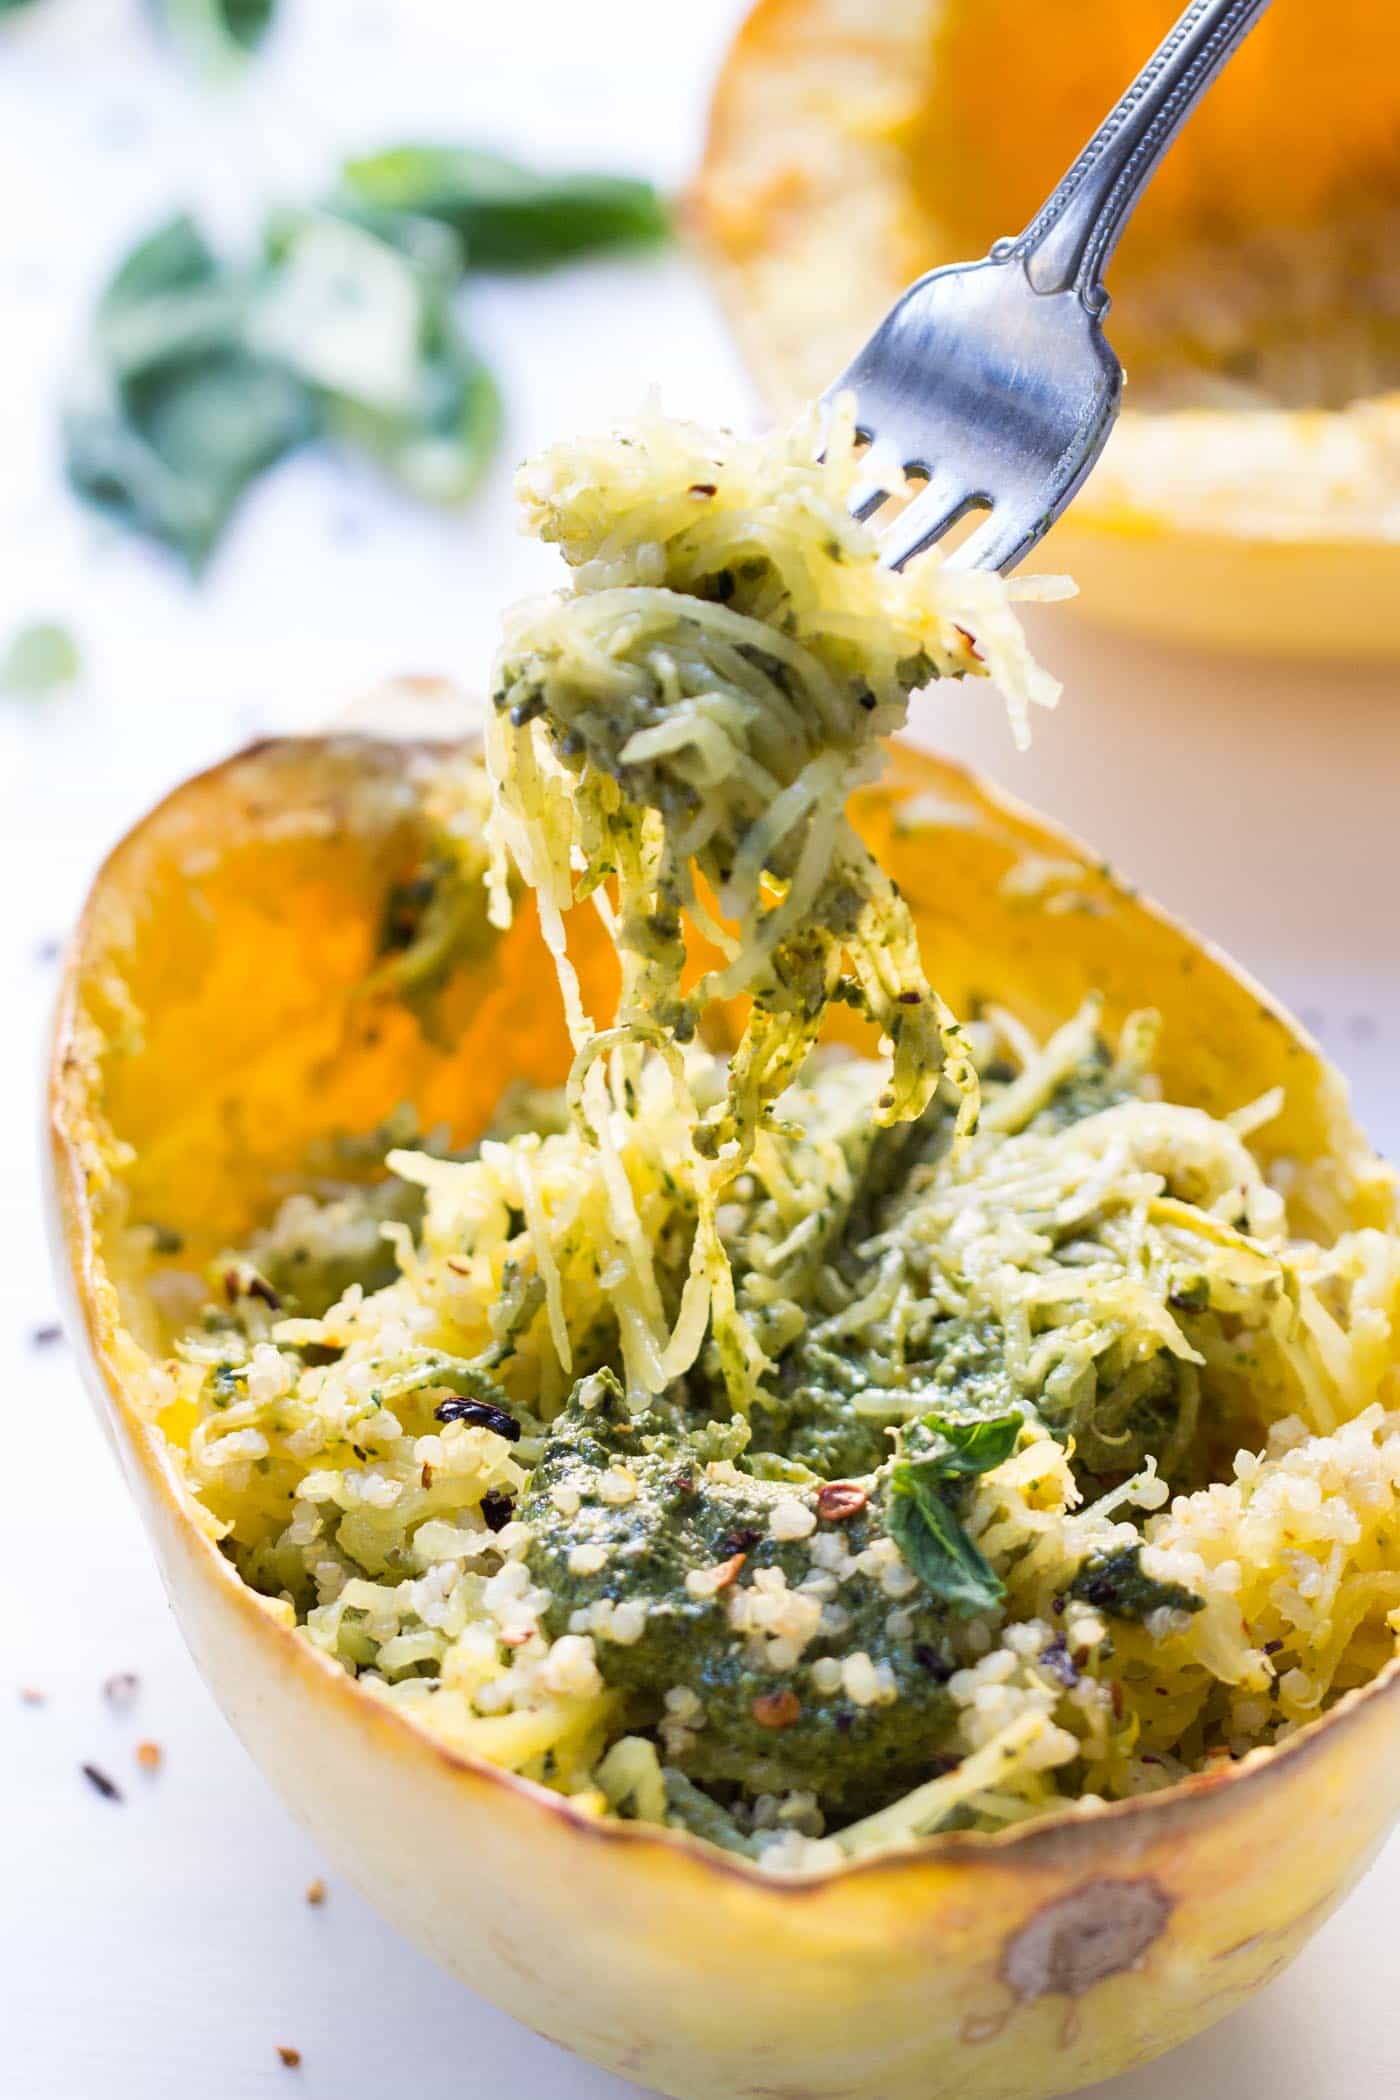 The ULTIMATE spaghetti squash recipe -- topped with homemade pesto, a little quinoa and some chili flakes. Simple, easy and so delicious!